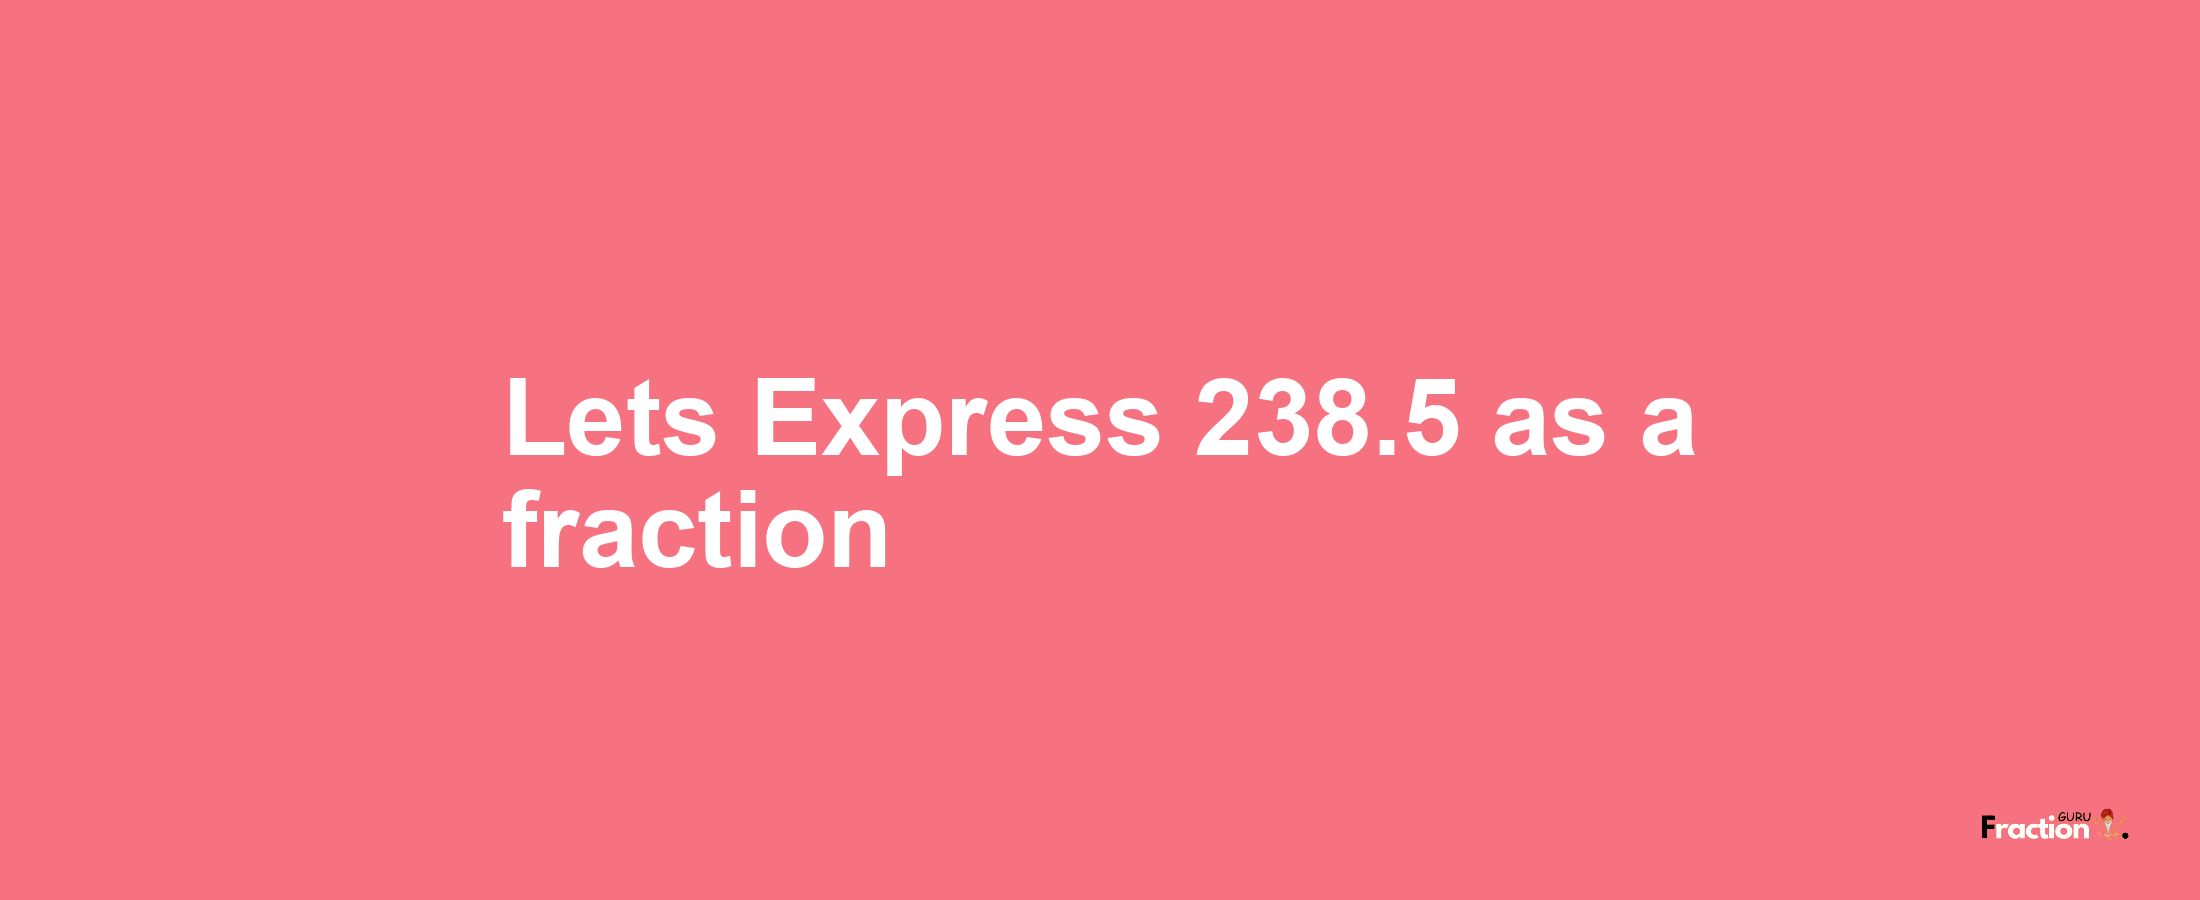 Lets Express 238.5 as afraction